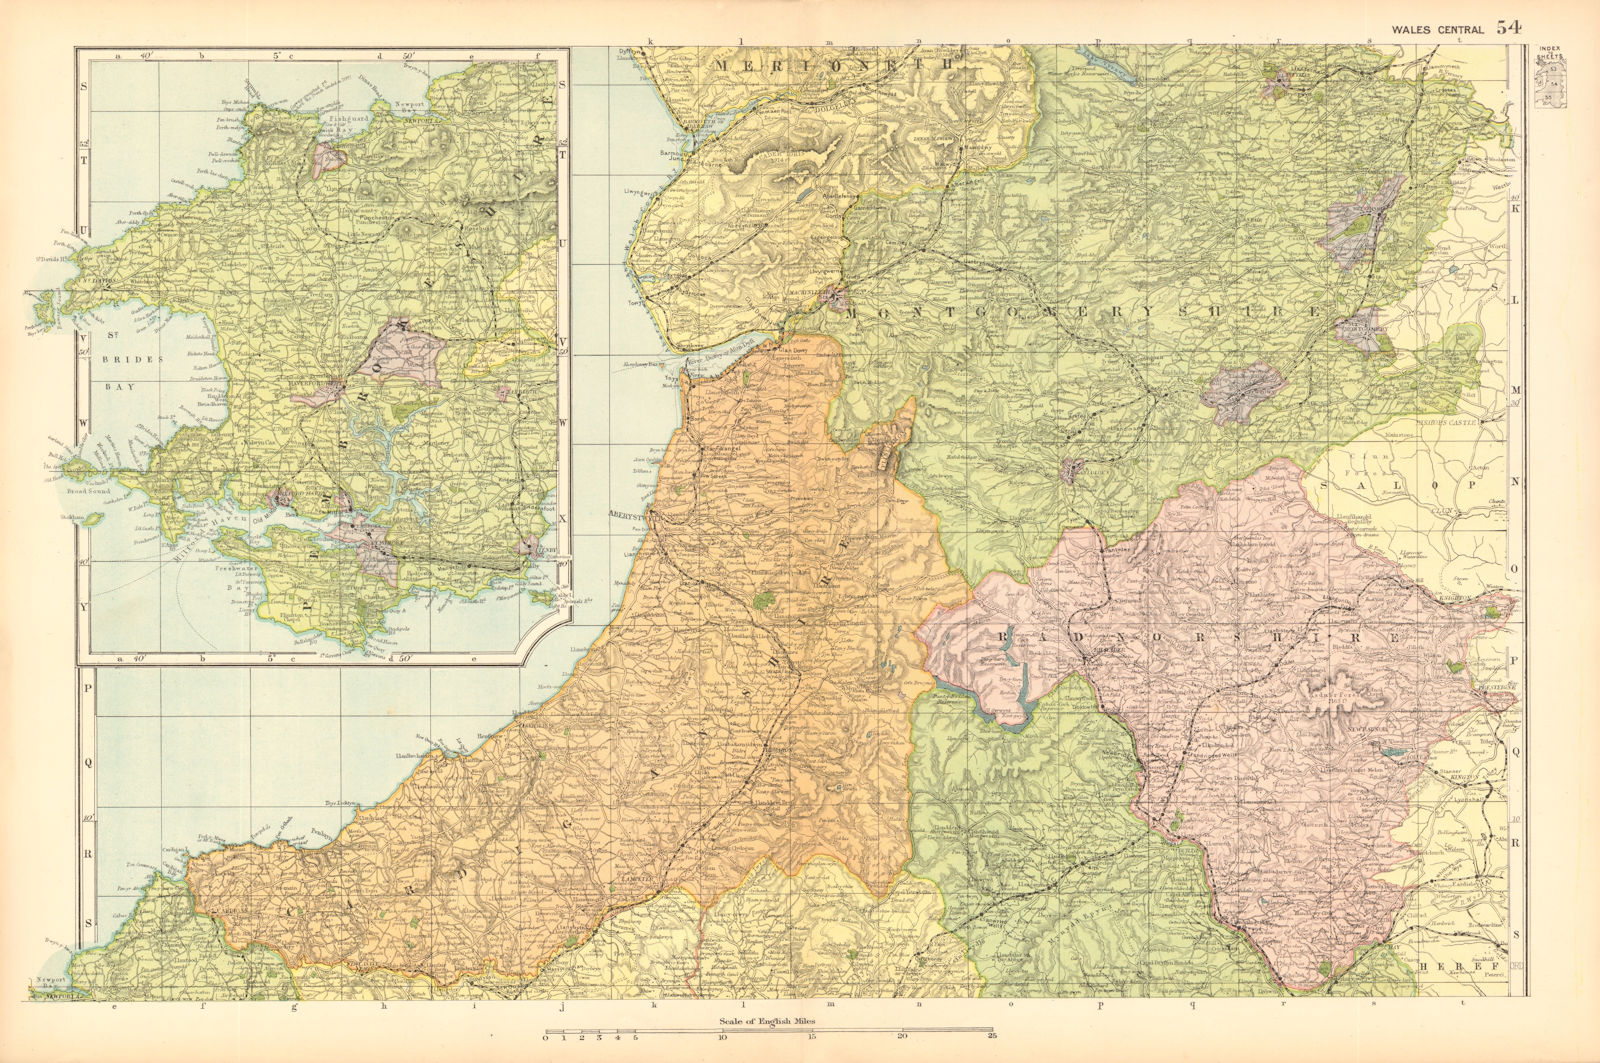 CENTRAL WALES & PEMBROKESHIRE. Showing Parliamentary divisions. BACON 1904 map